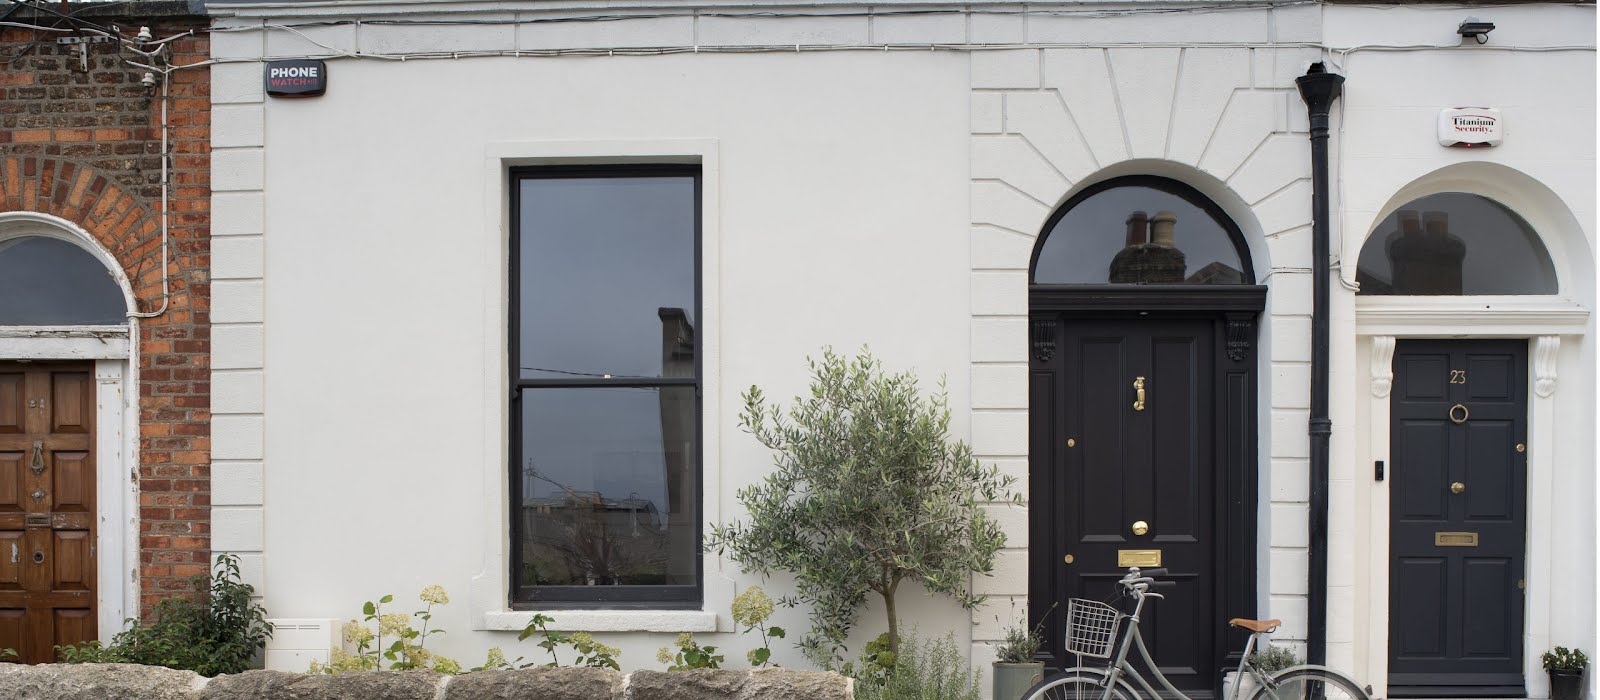 This Dublin 4 cottage has had a complete transformation thanks to its architect owner